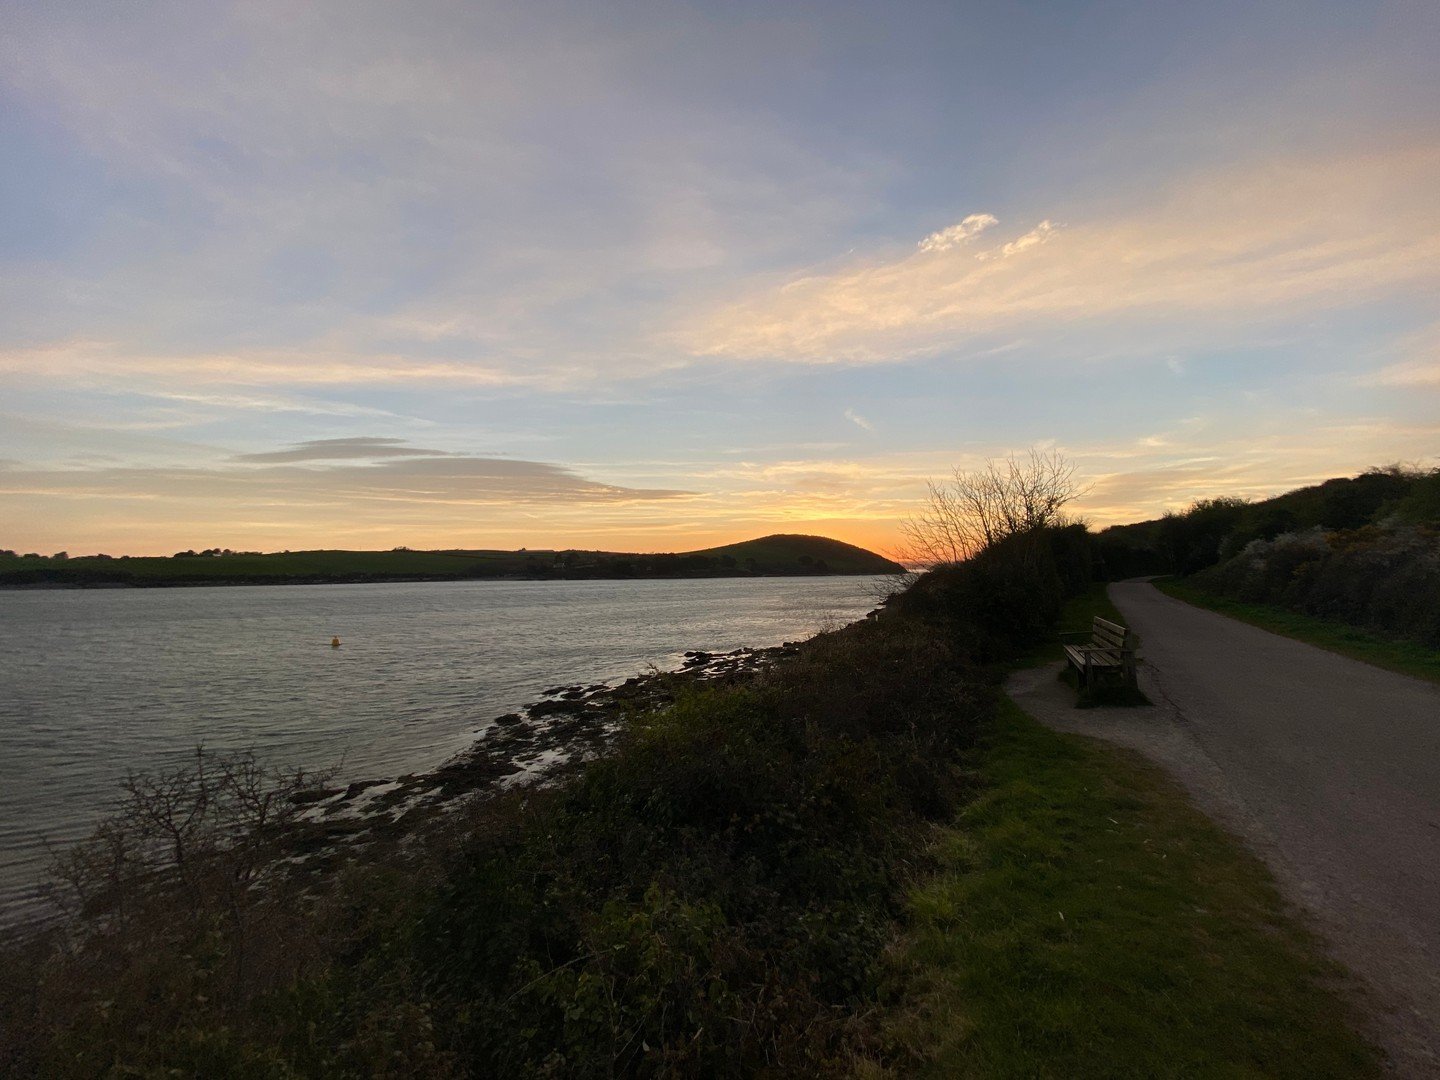 Early morning on the Camel Trail, good to be back out again x

www.bridgebikehire.co.uk

#cameltrail #cornwall #bikehire #cyclehire #cornwall #sunrise